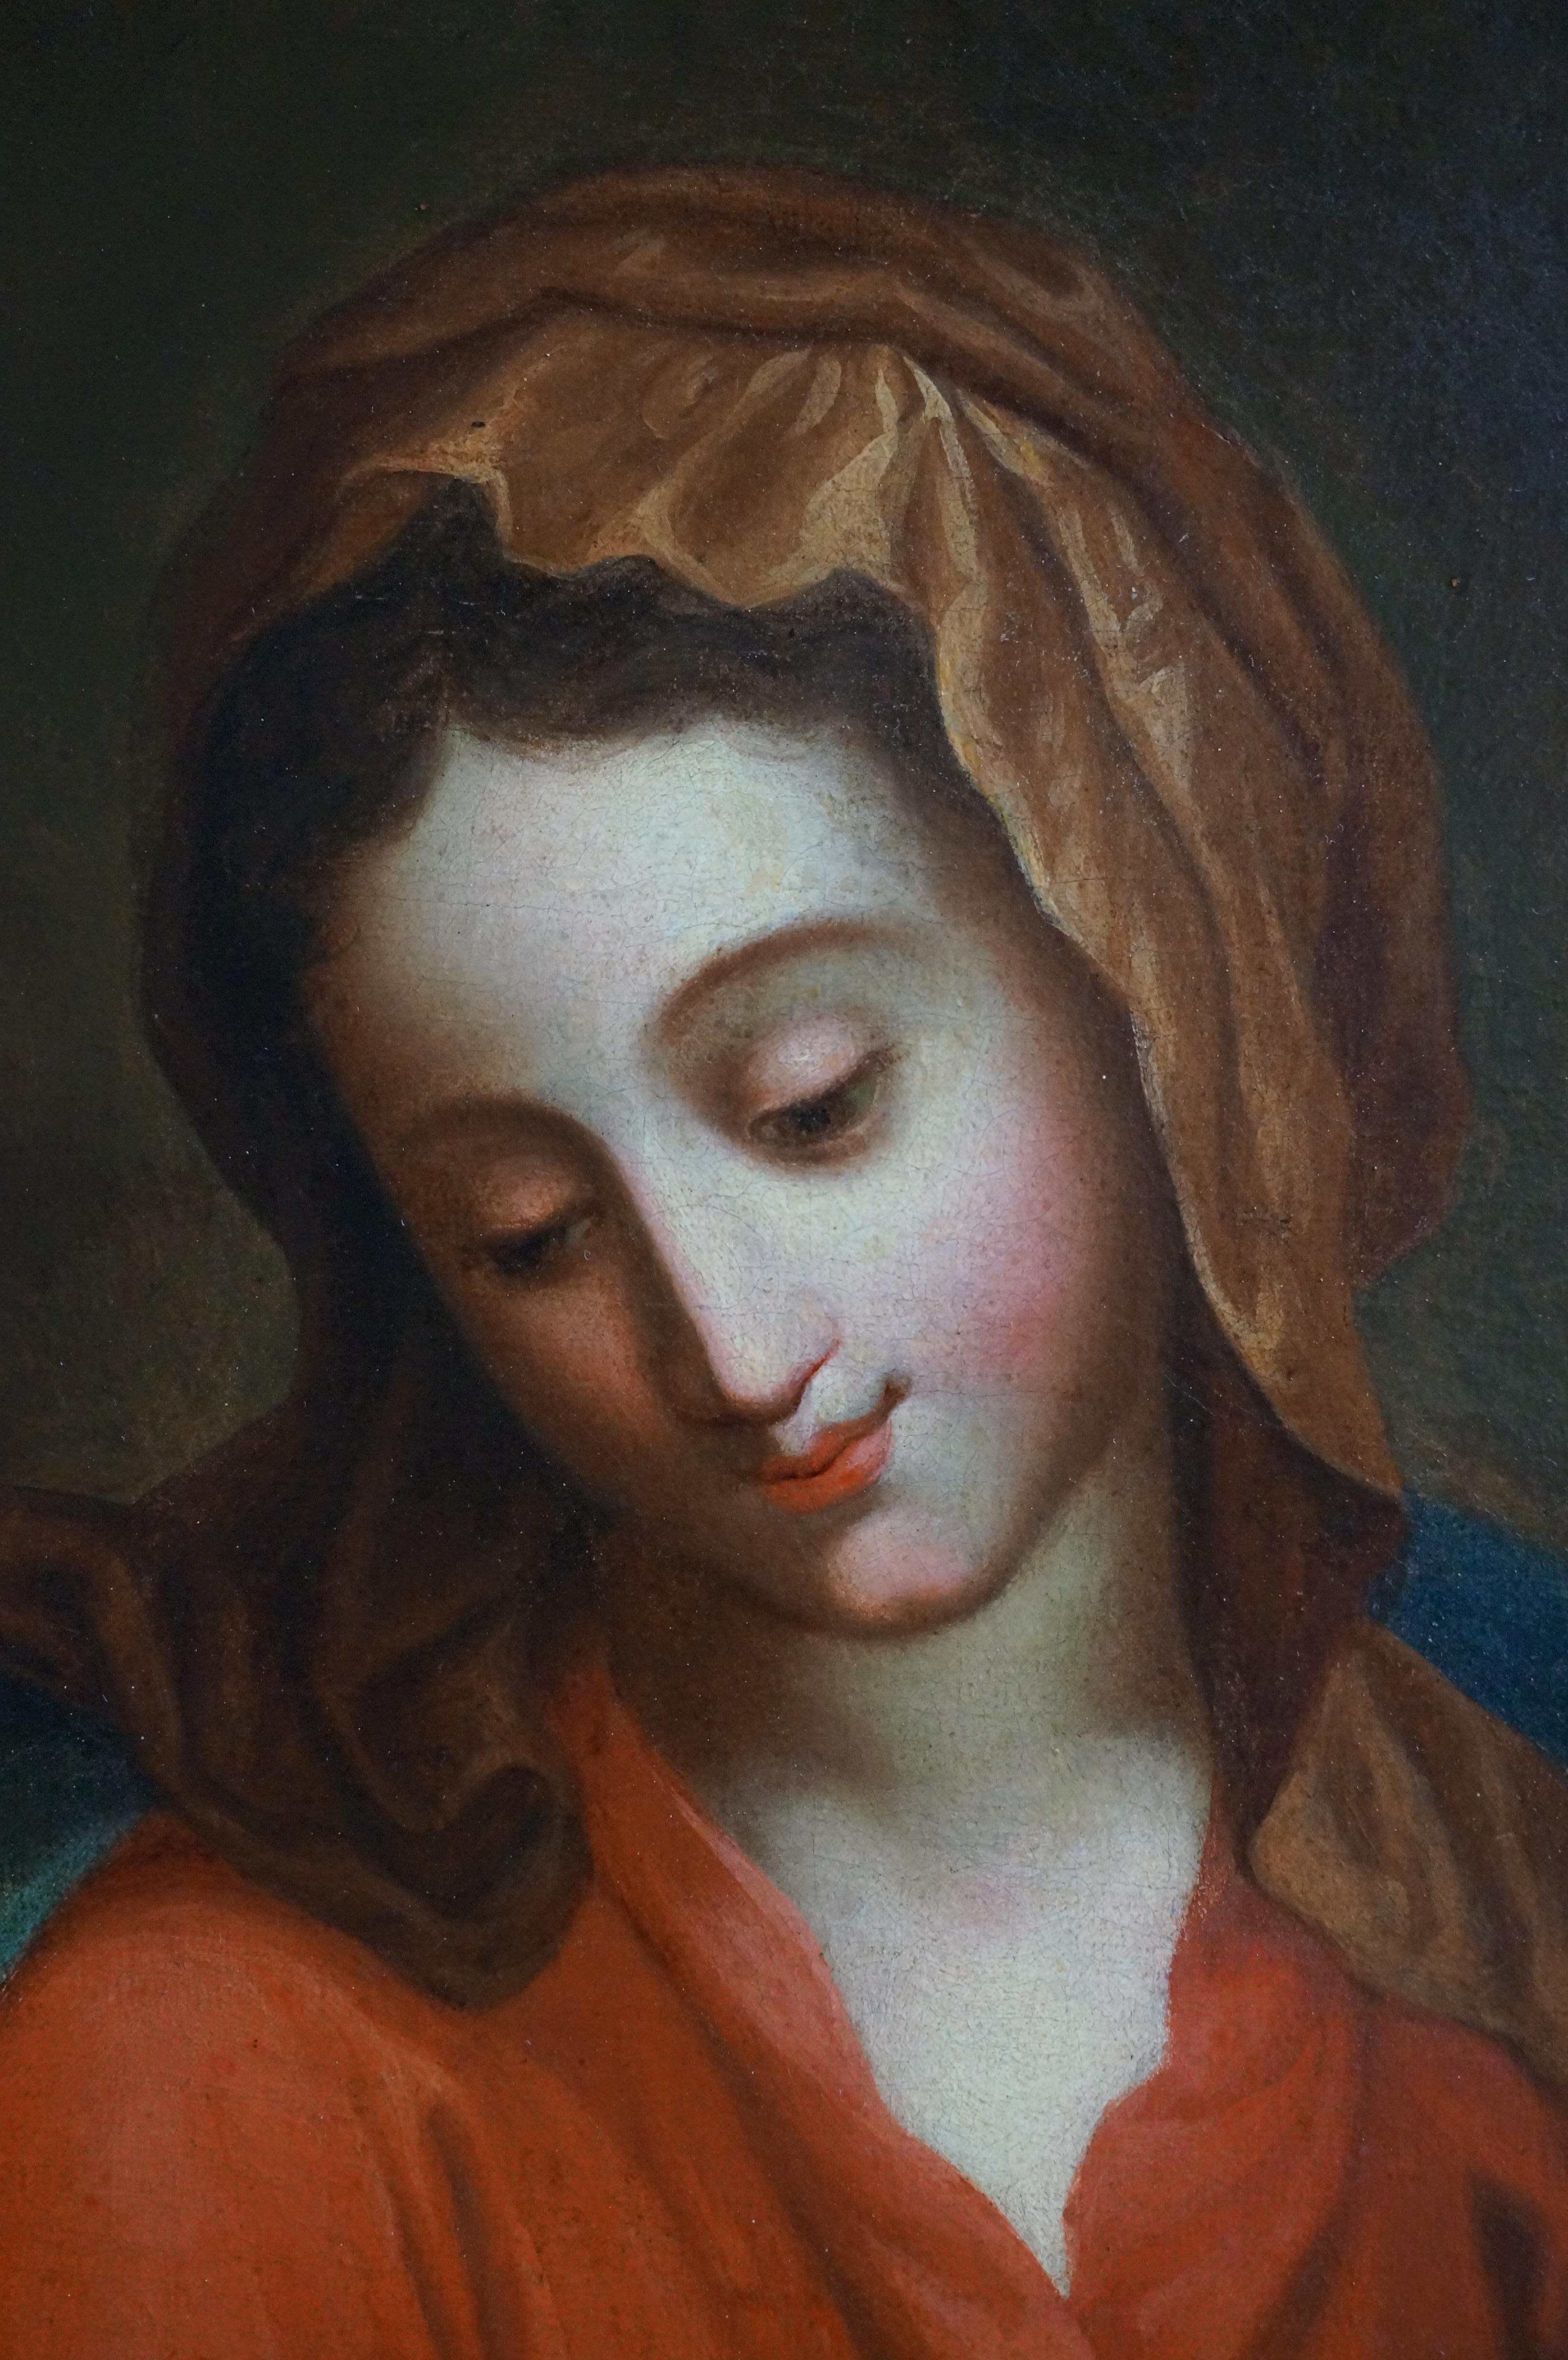 Italian School, 18th century
Depicted are the Madonna and Child Jesus, the virgin Mary is holding the Child Jesus lovingly in her arms. The child, lying on a bundle of cloth and with a nimbus around his head (expressing his divine nature) is looking